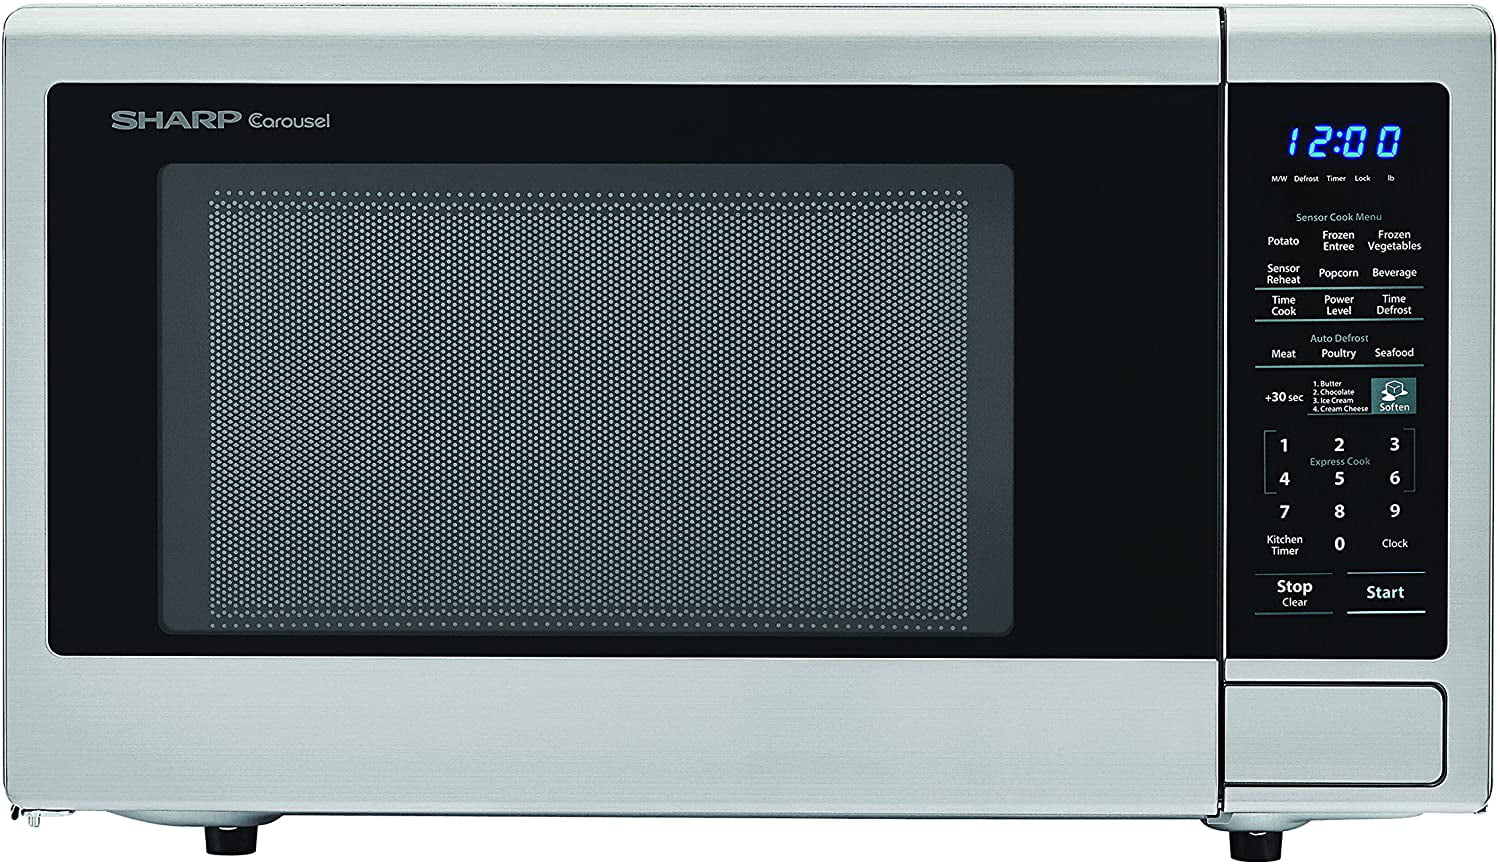 SHARP Stainless Steel Carousel 1.8 Cu. Ft. 1100W Countertop Microwave Oven (ISTA 6 Packaging